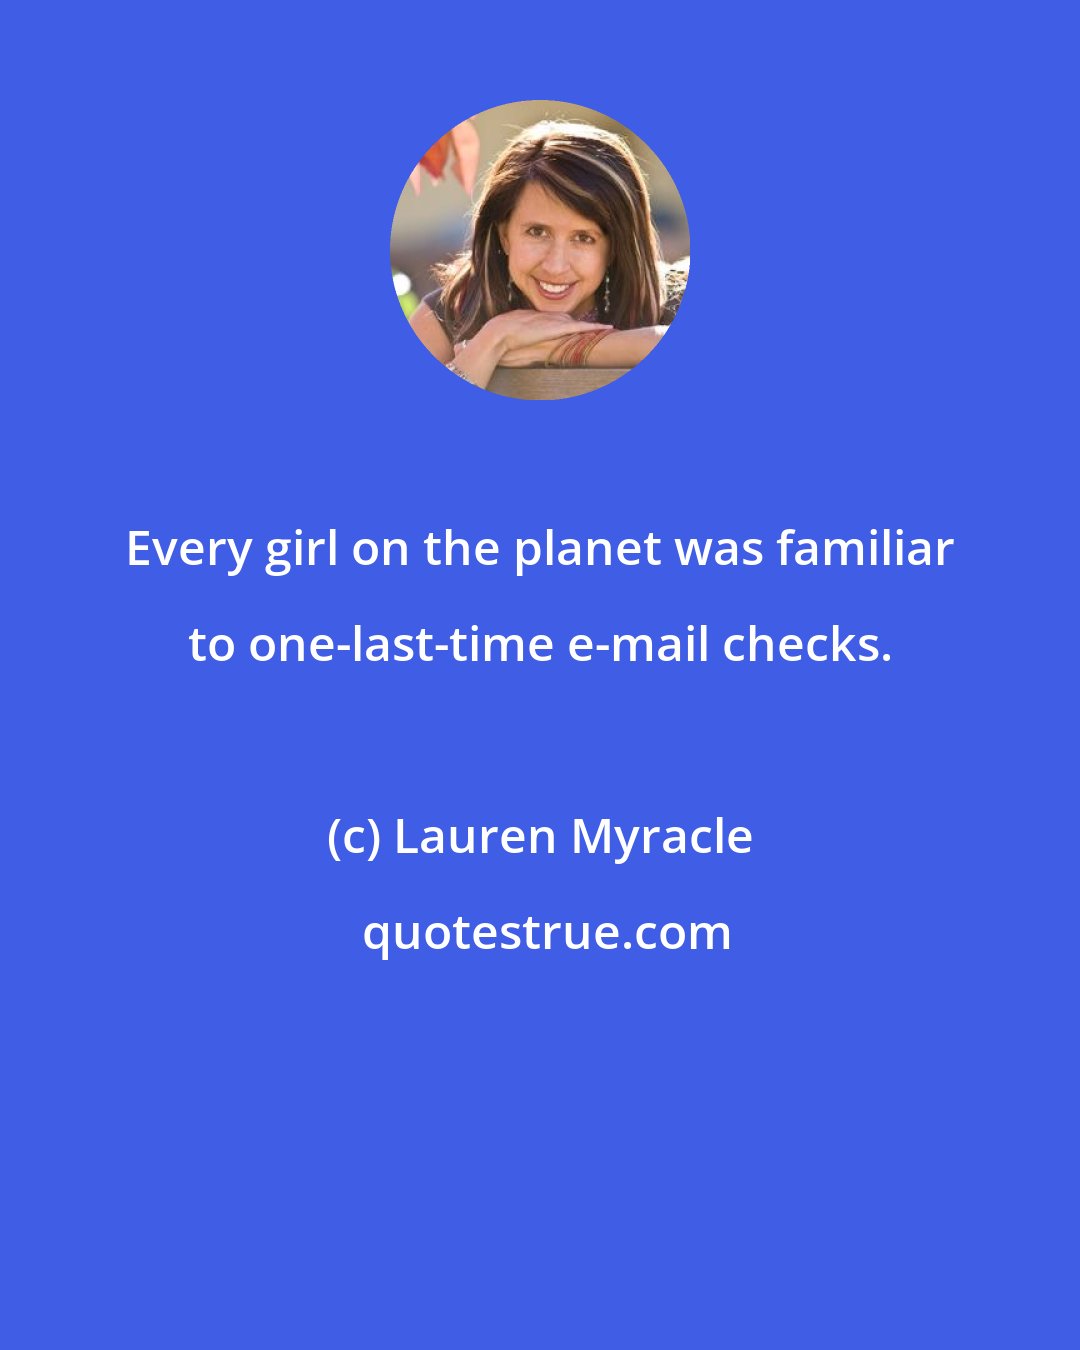 Lauren Myracle: Every girl on the planet was familiar to one-last-time e-mail checks.